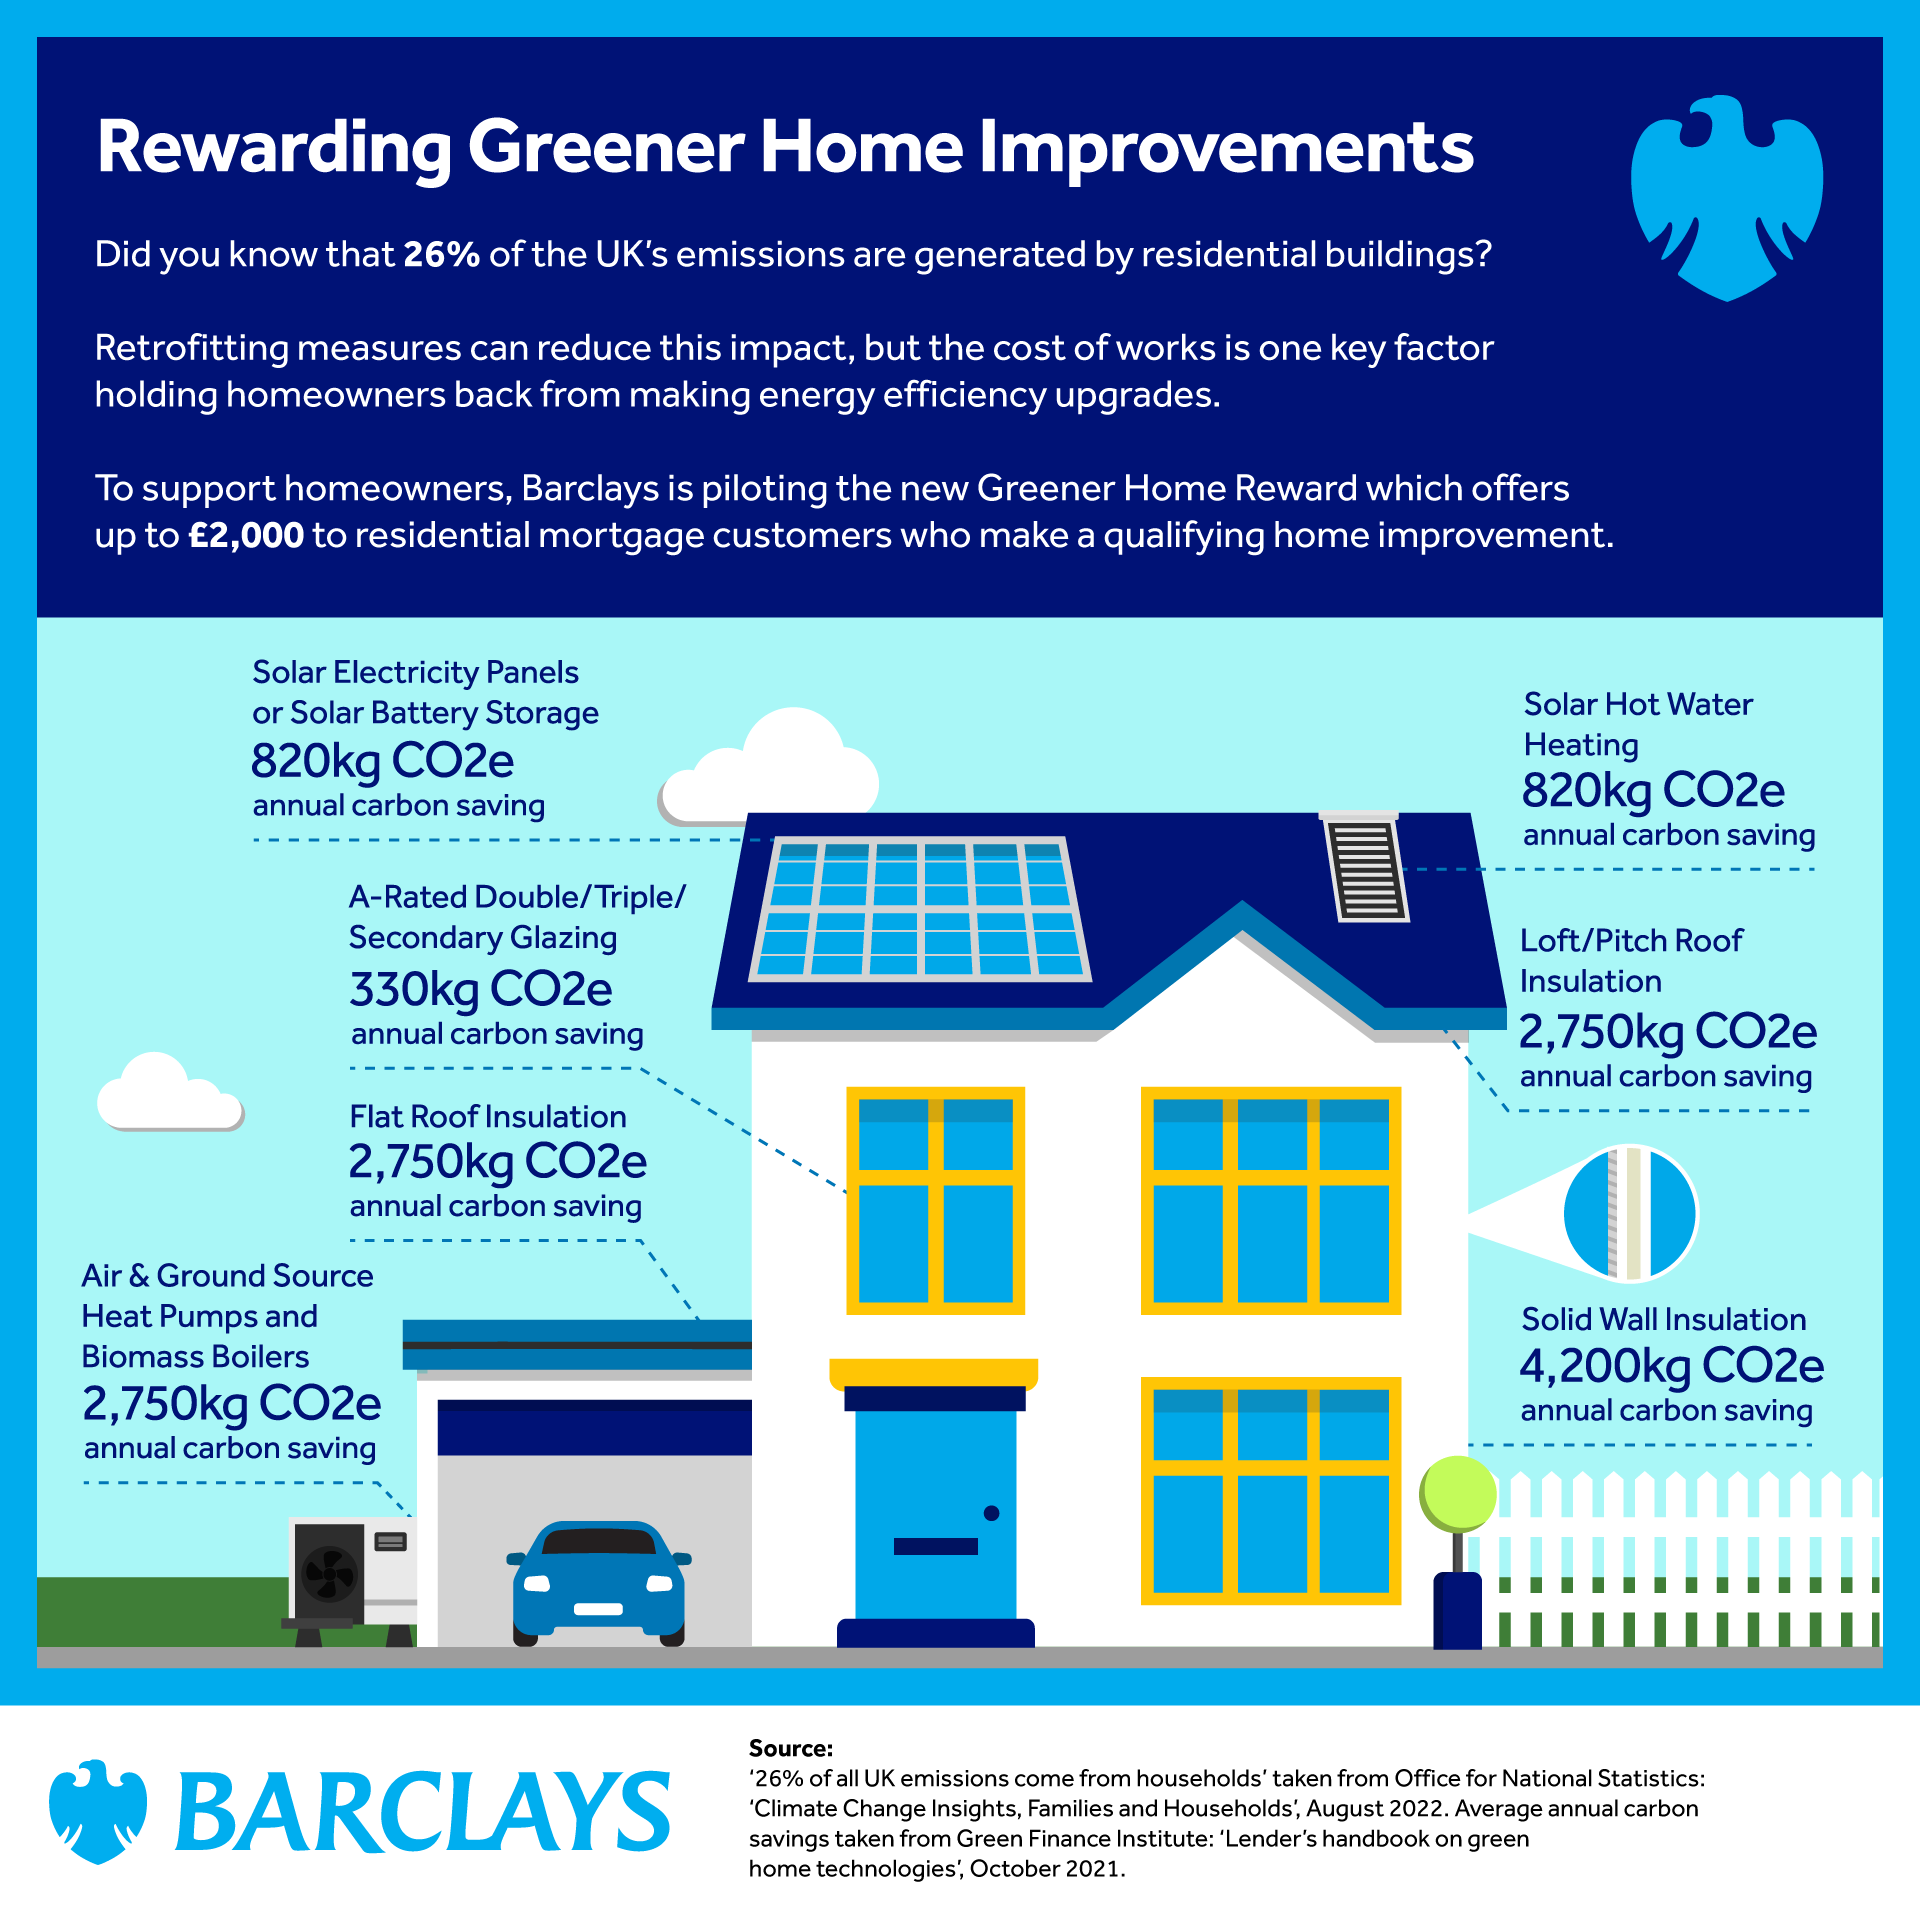 Infographic discussing greener home improvements